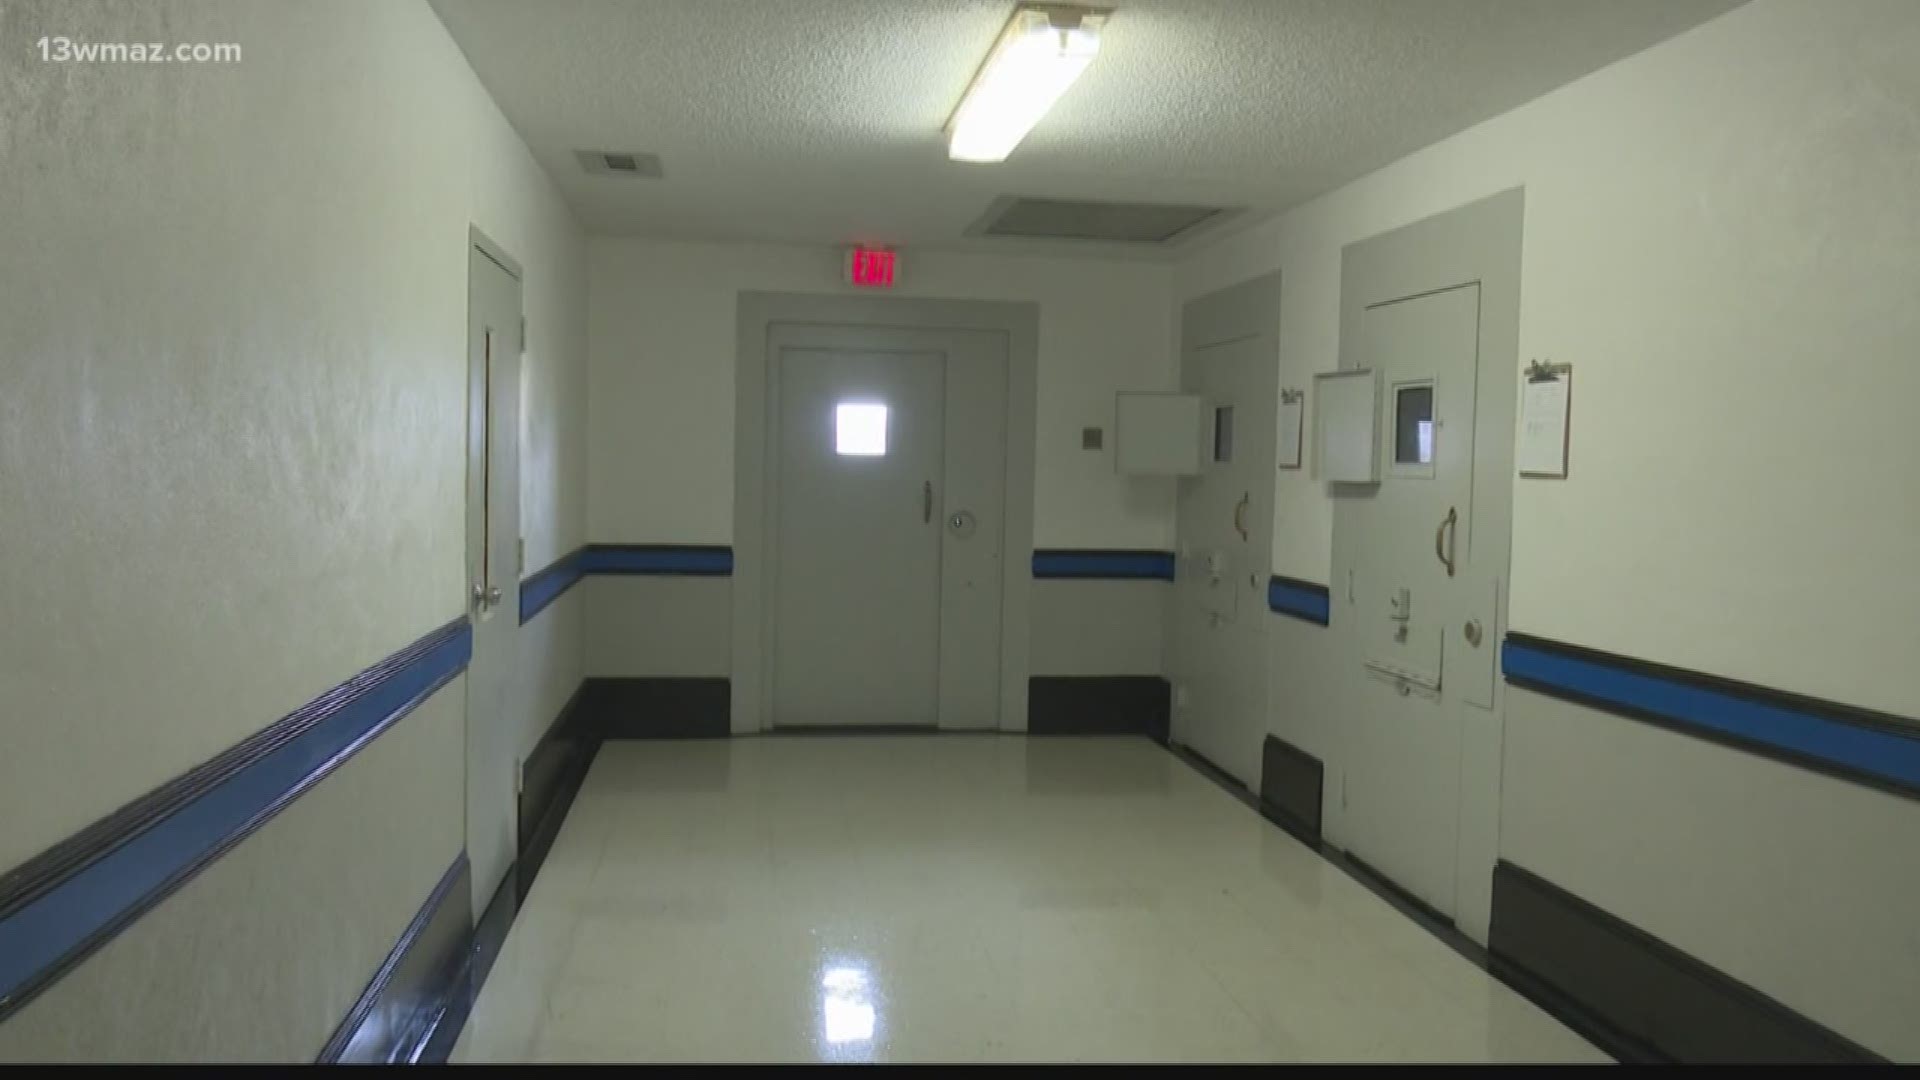 Laurens County Sheriff's Office works on expanding the jail